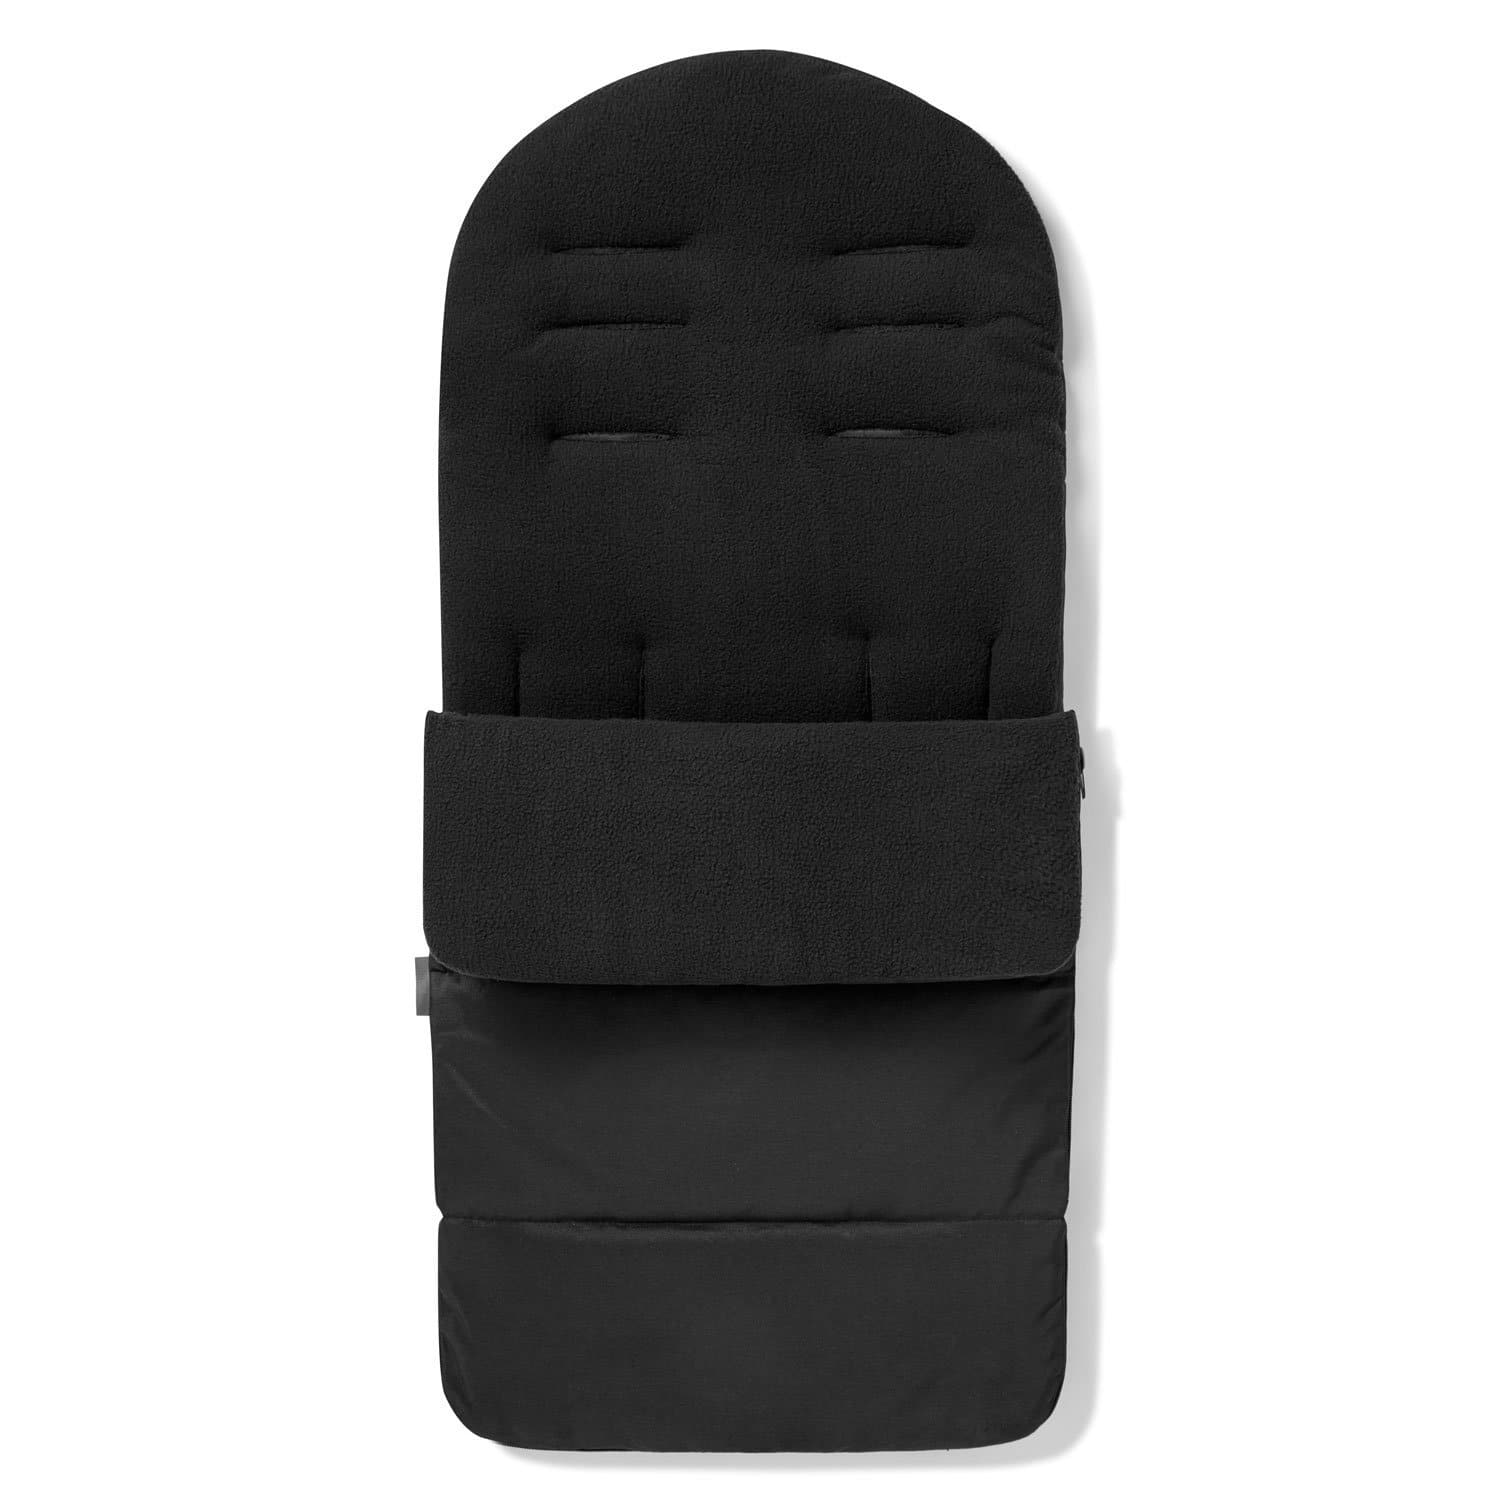 Premium Footmuff / Cosy Toes Compatible with I'coo - Black Jack / Fits All Models | For Your Little One